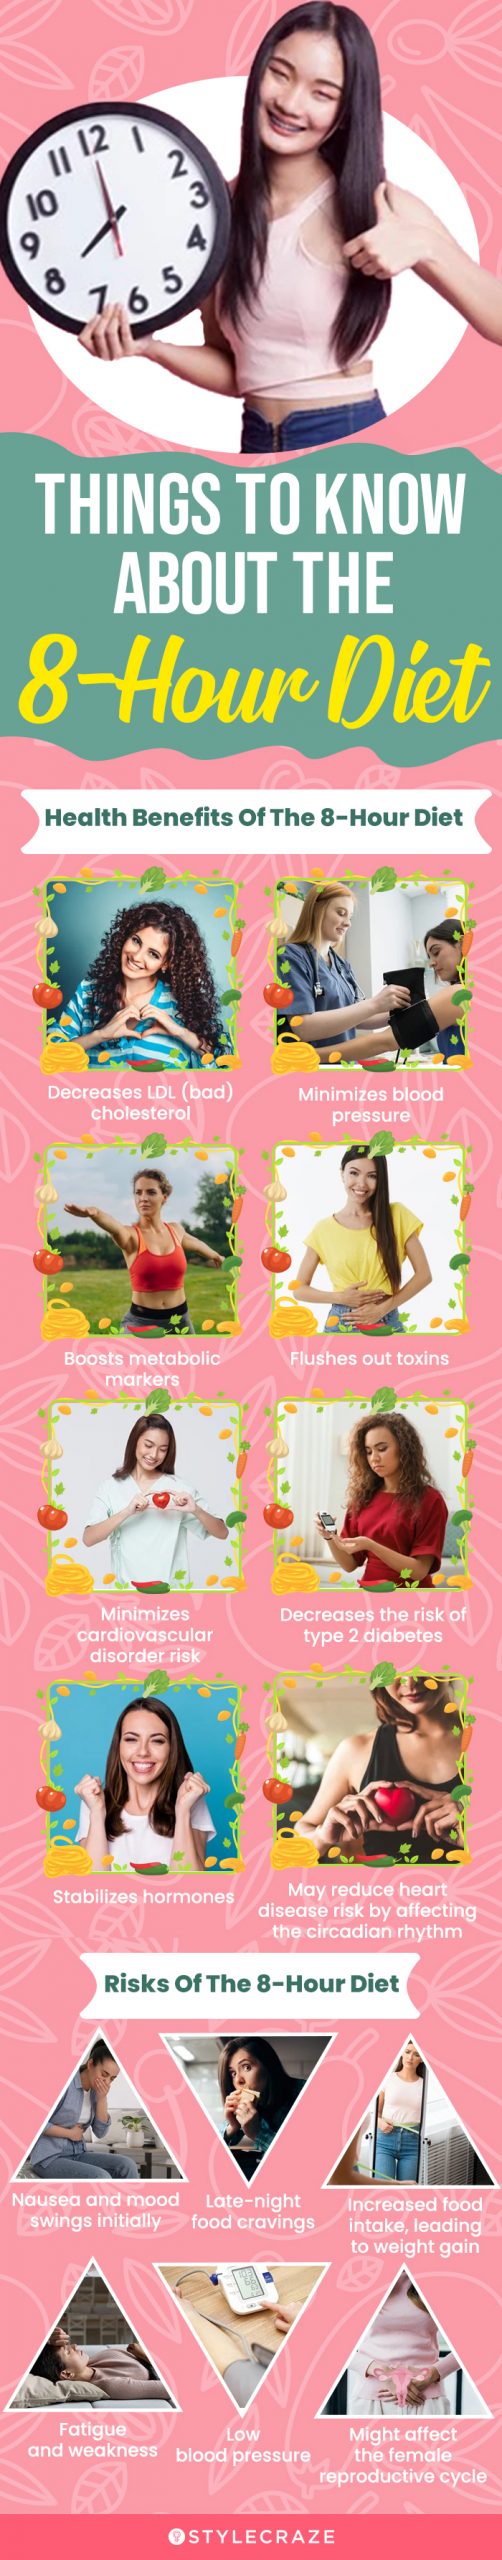 things to know about the 8 hour diet (infographic)